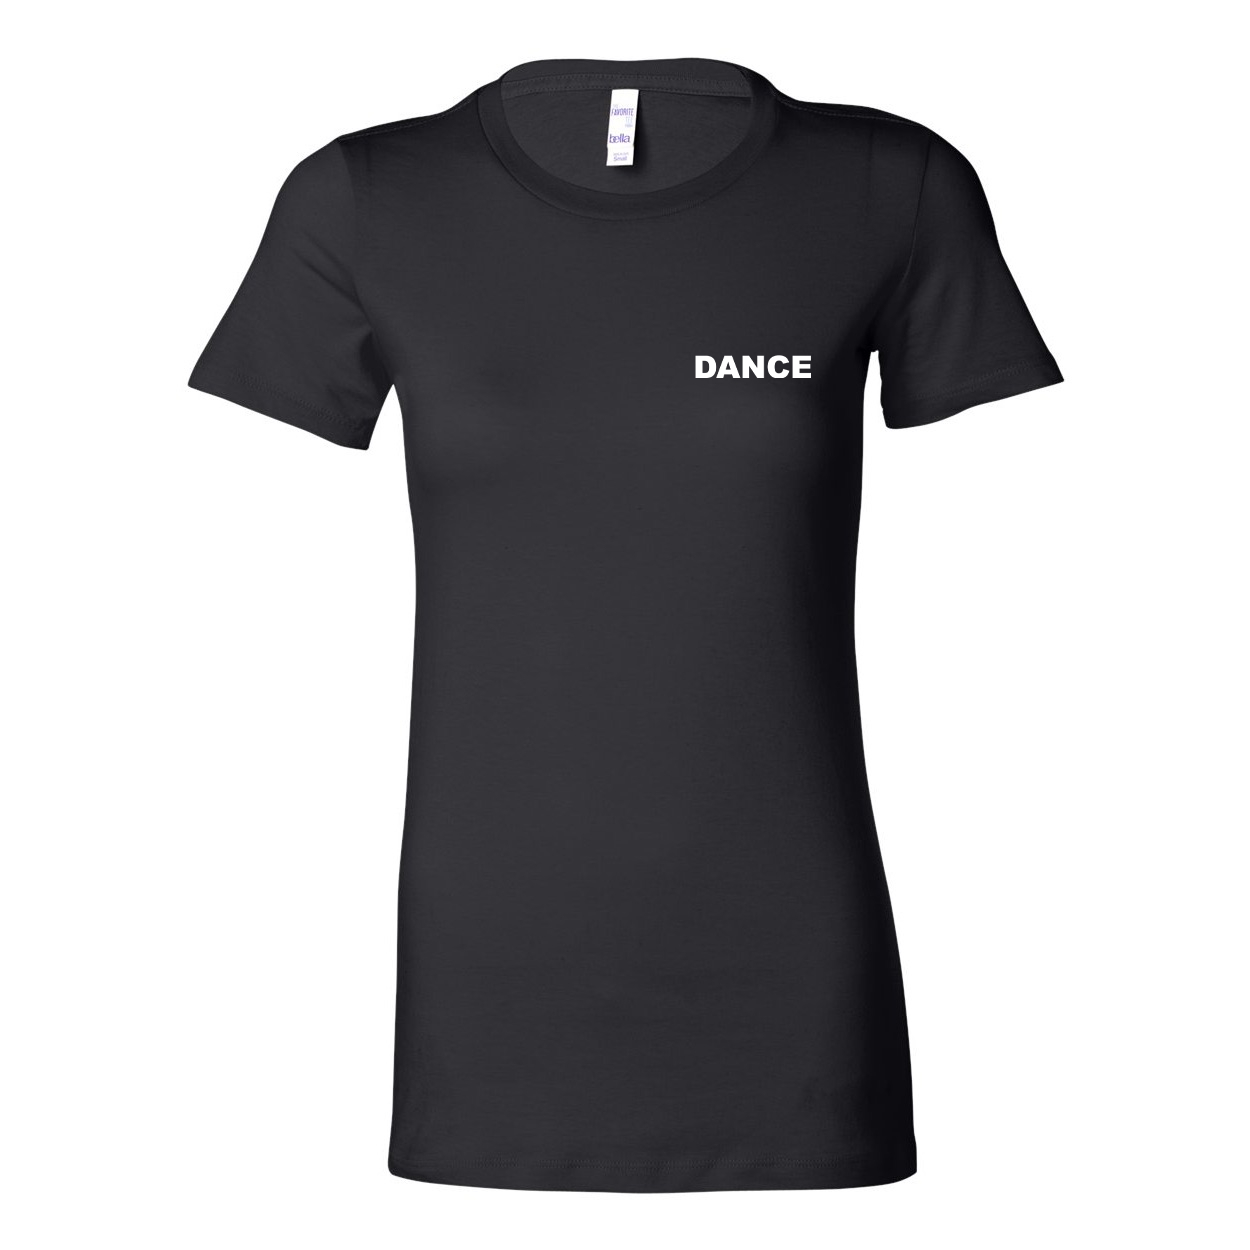 Dance Brand Logo Women's Night Out Fitted Tri-Blend T-Shirt Black